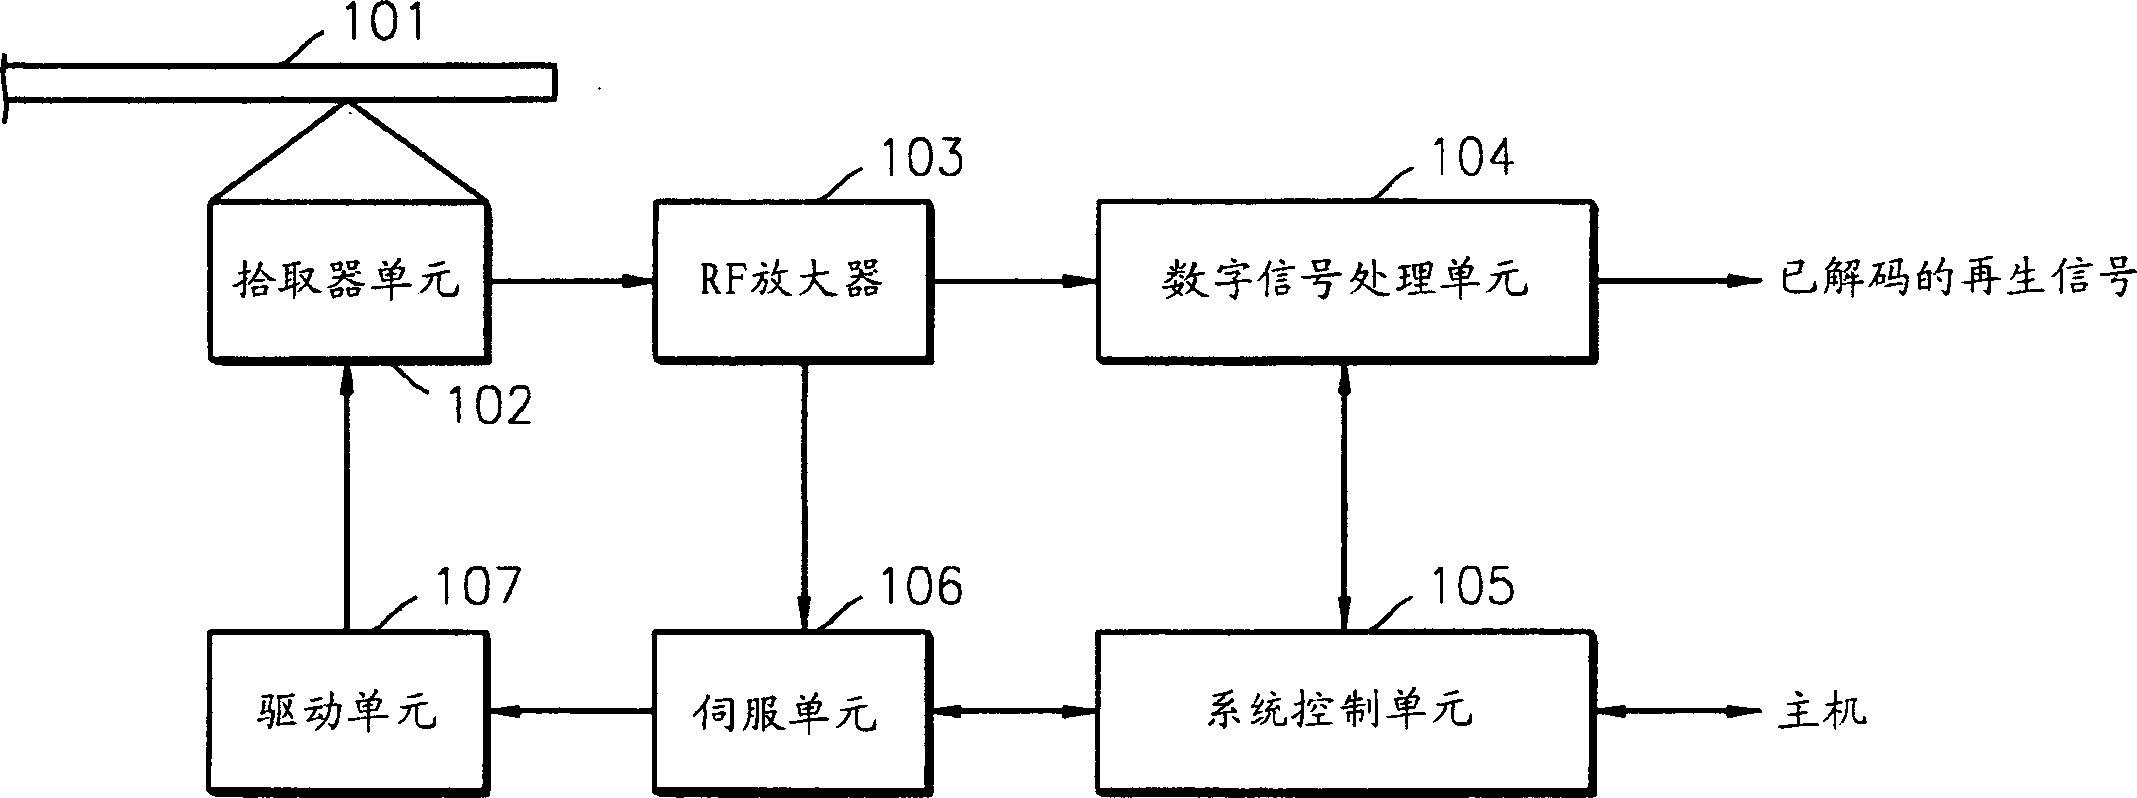 Method and apparatus for preventing disk driver fault